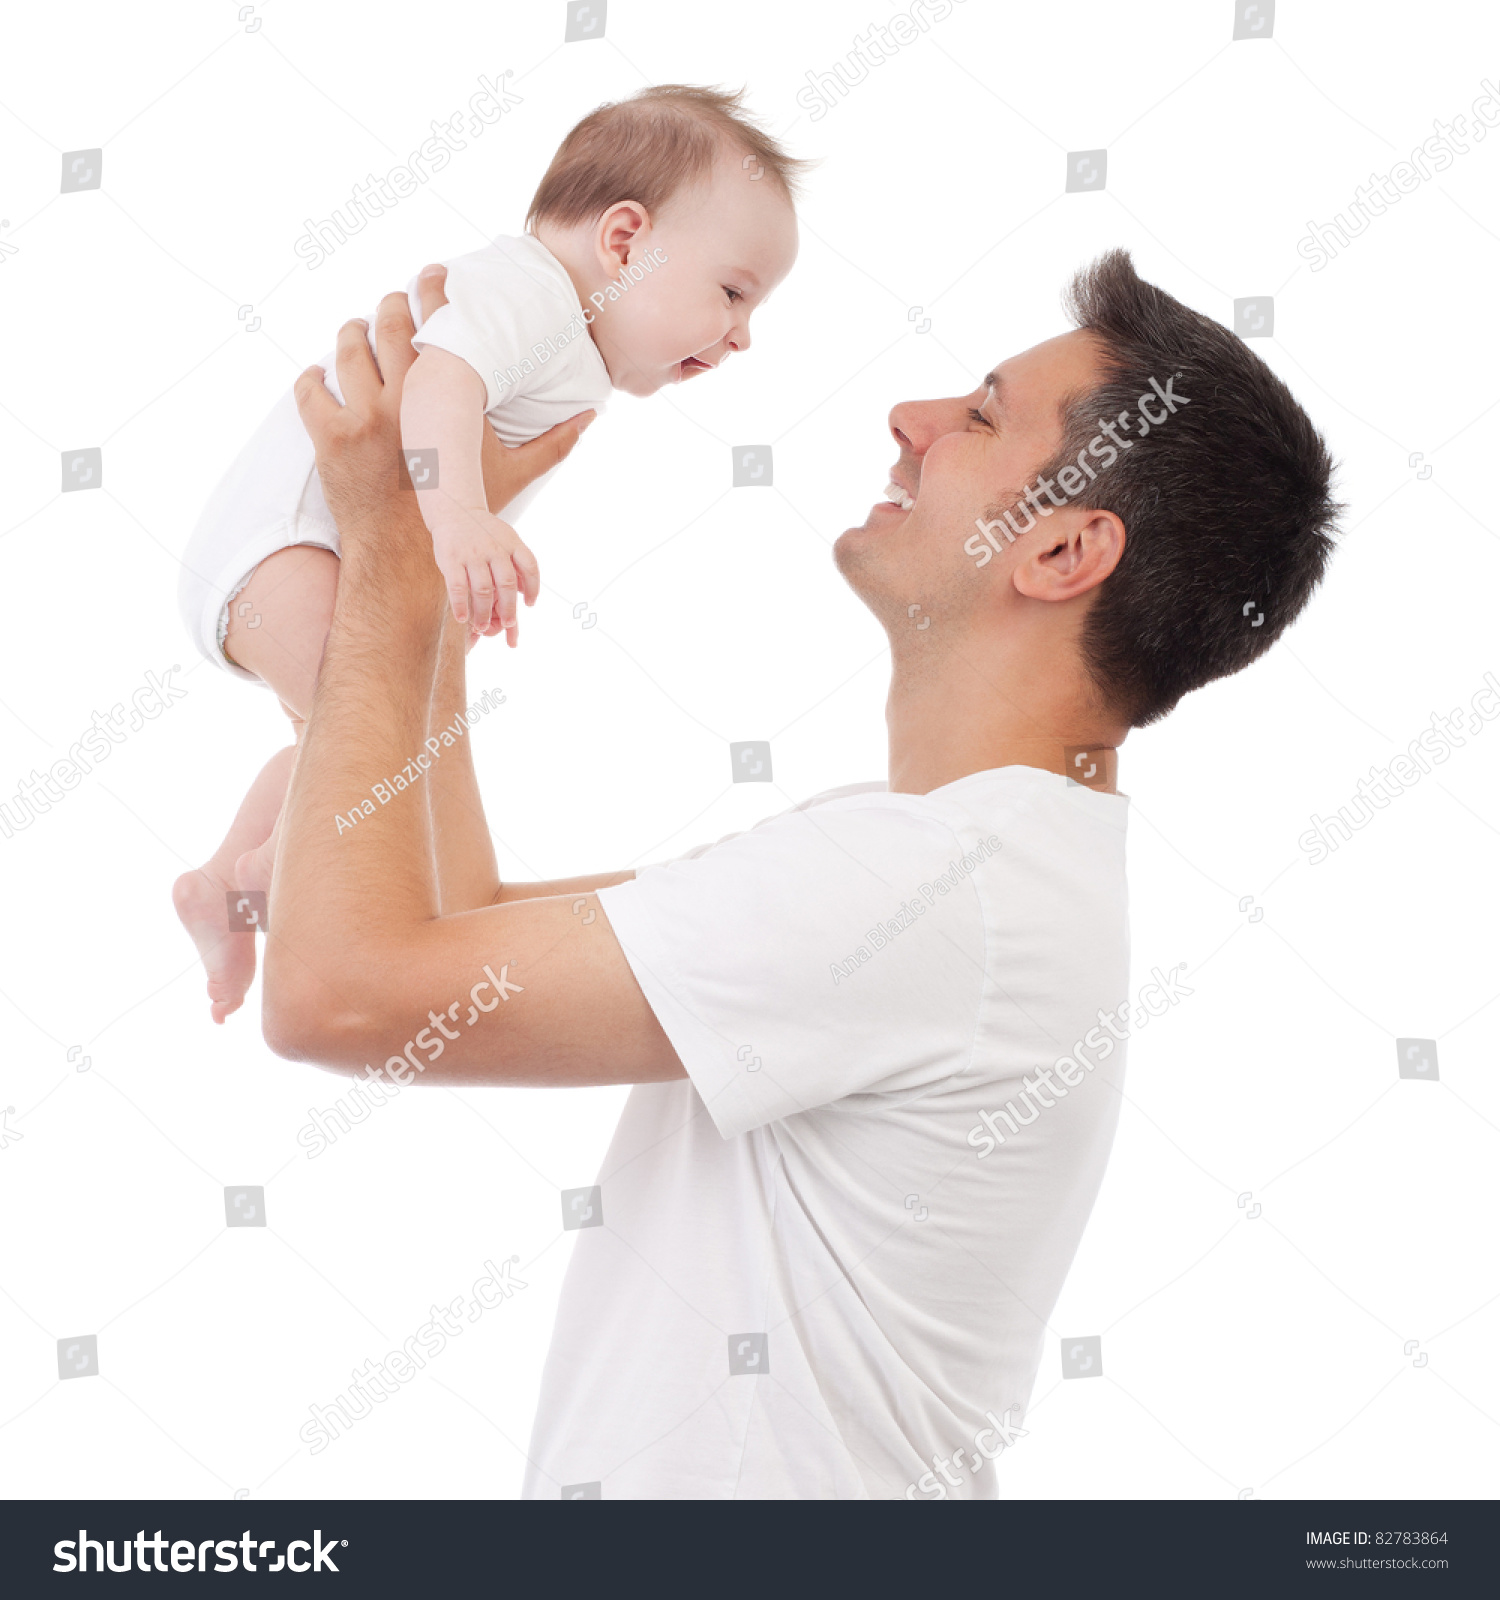 Happy Young Man Holding Smiling 45 Stock Photo (Royalty Free ...